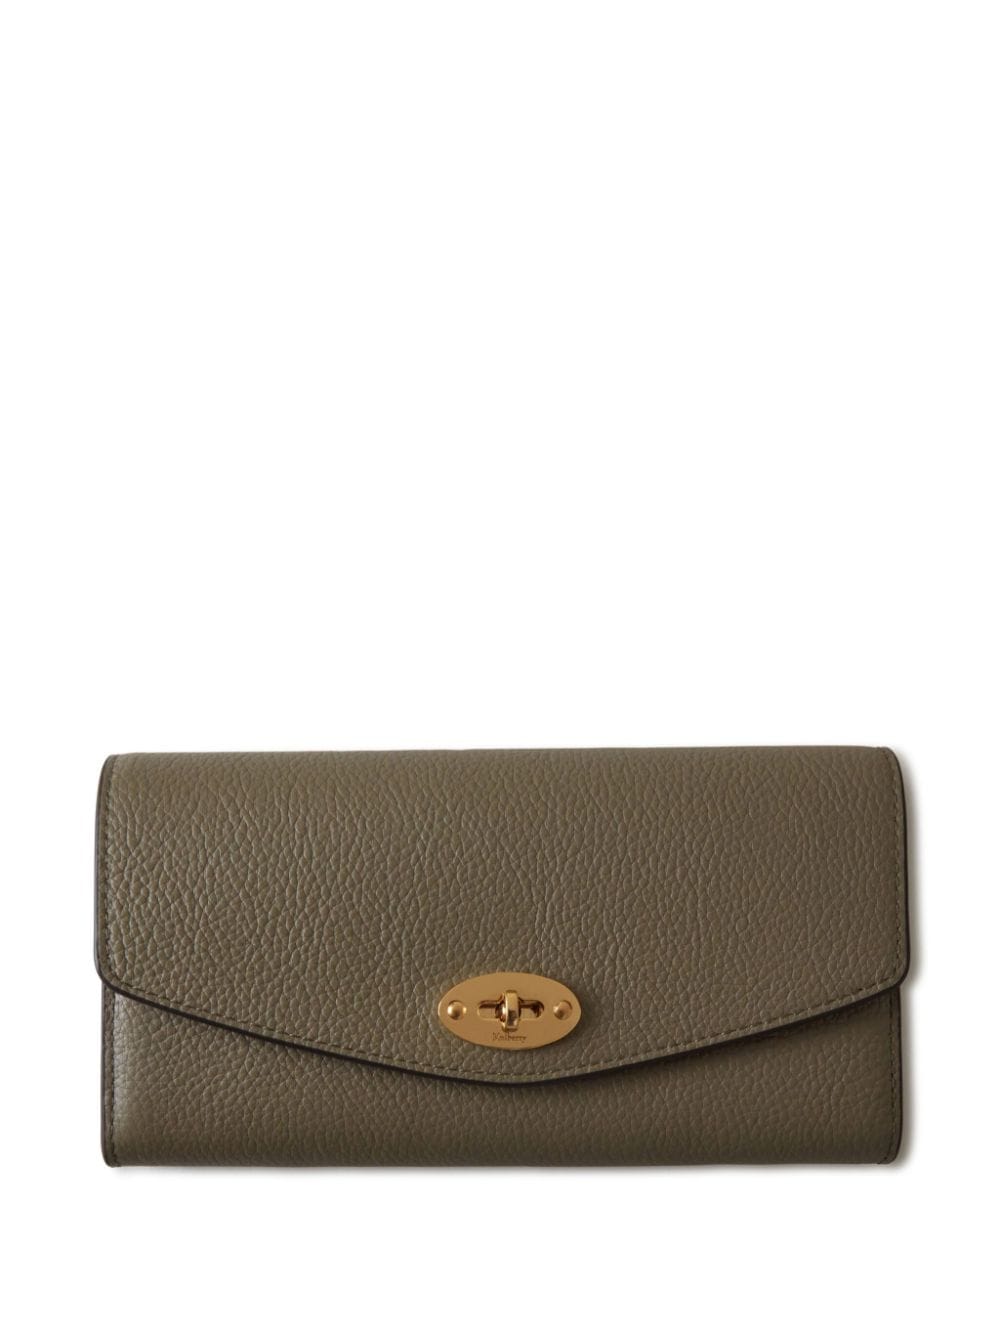 Mulberry Small Darley Leather Wallet In Green